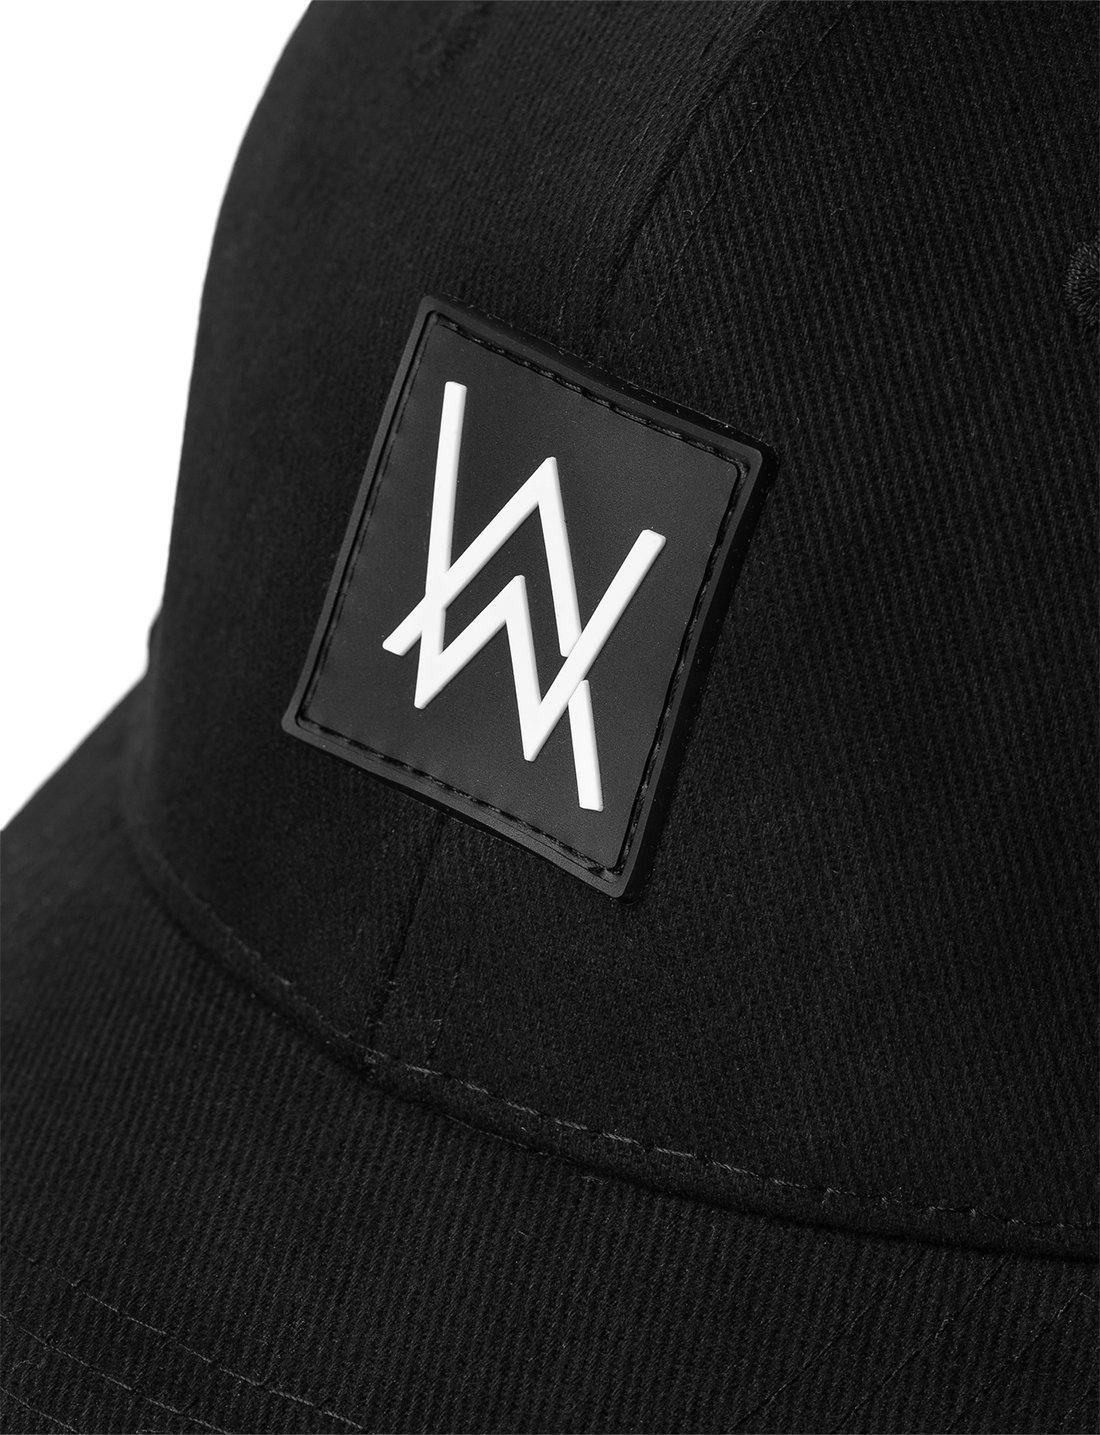 Close-up of the Alan Walker Core Logo Cap's front, highlighting the white 'AW' logo on a black square patch against the cap's black fabric, detailing the stitching and texture.